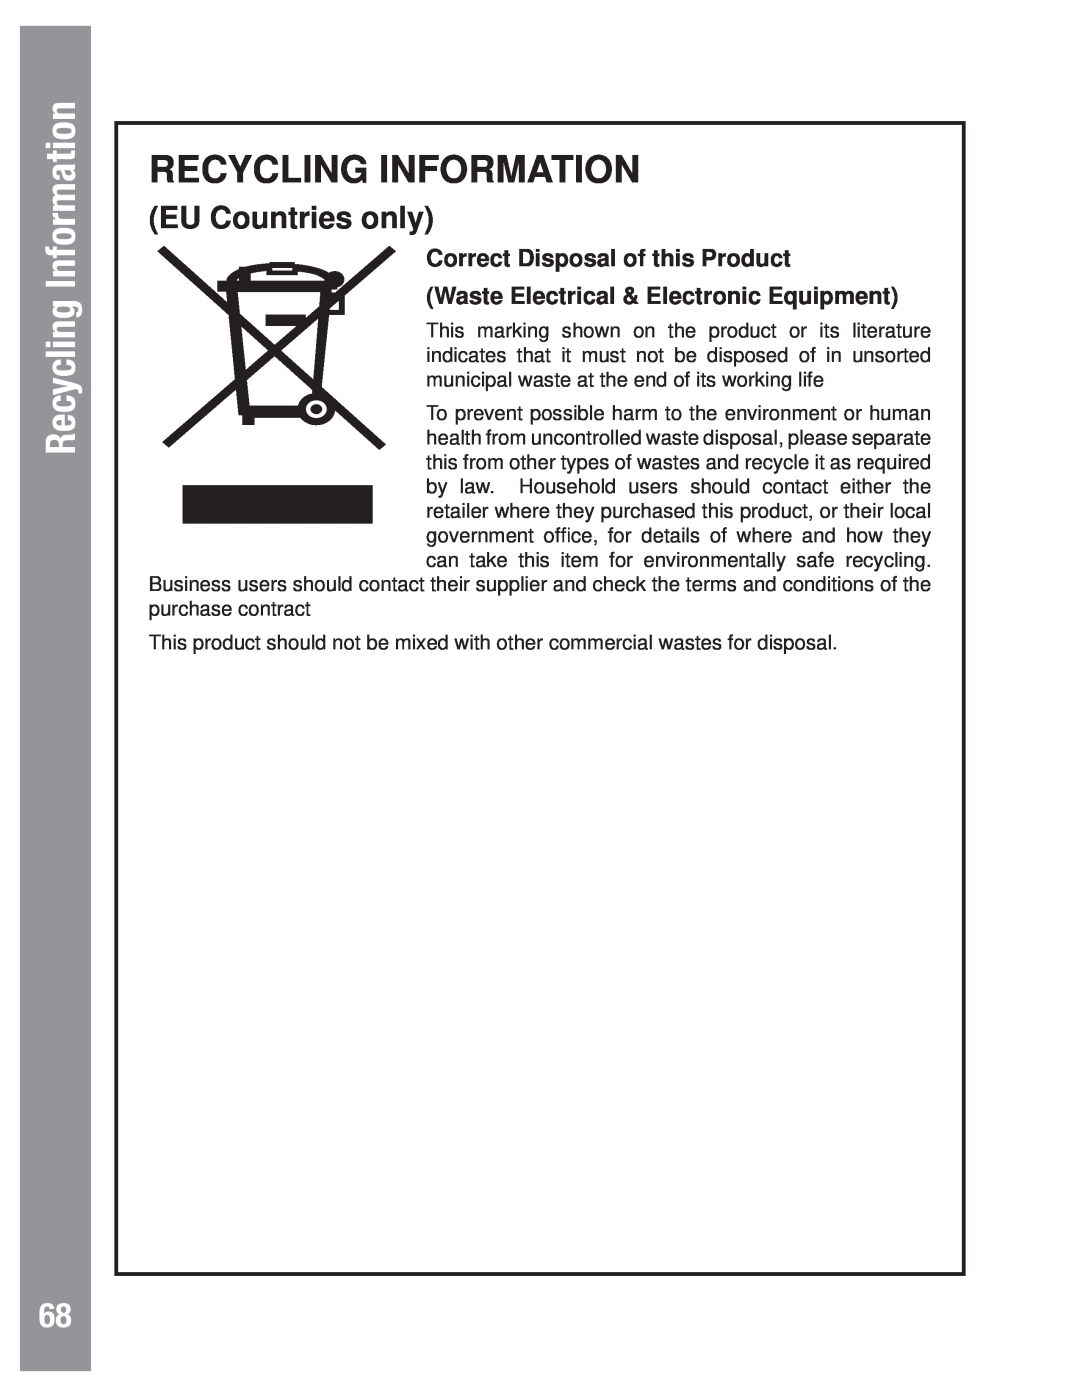 Meade LX80 instruction manual Recycling Information, EU Countries only, Correct Disposal of this Product 